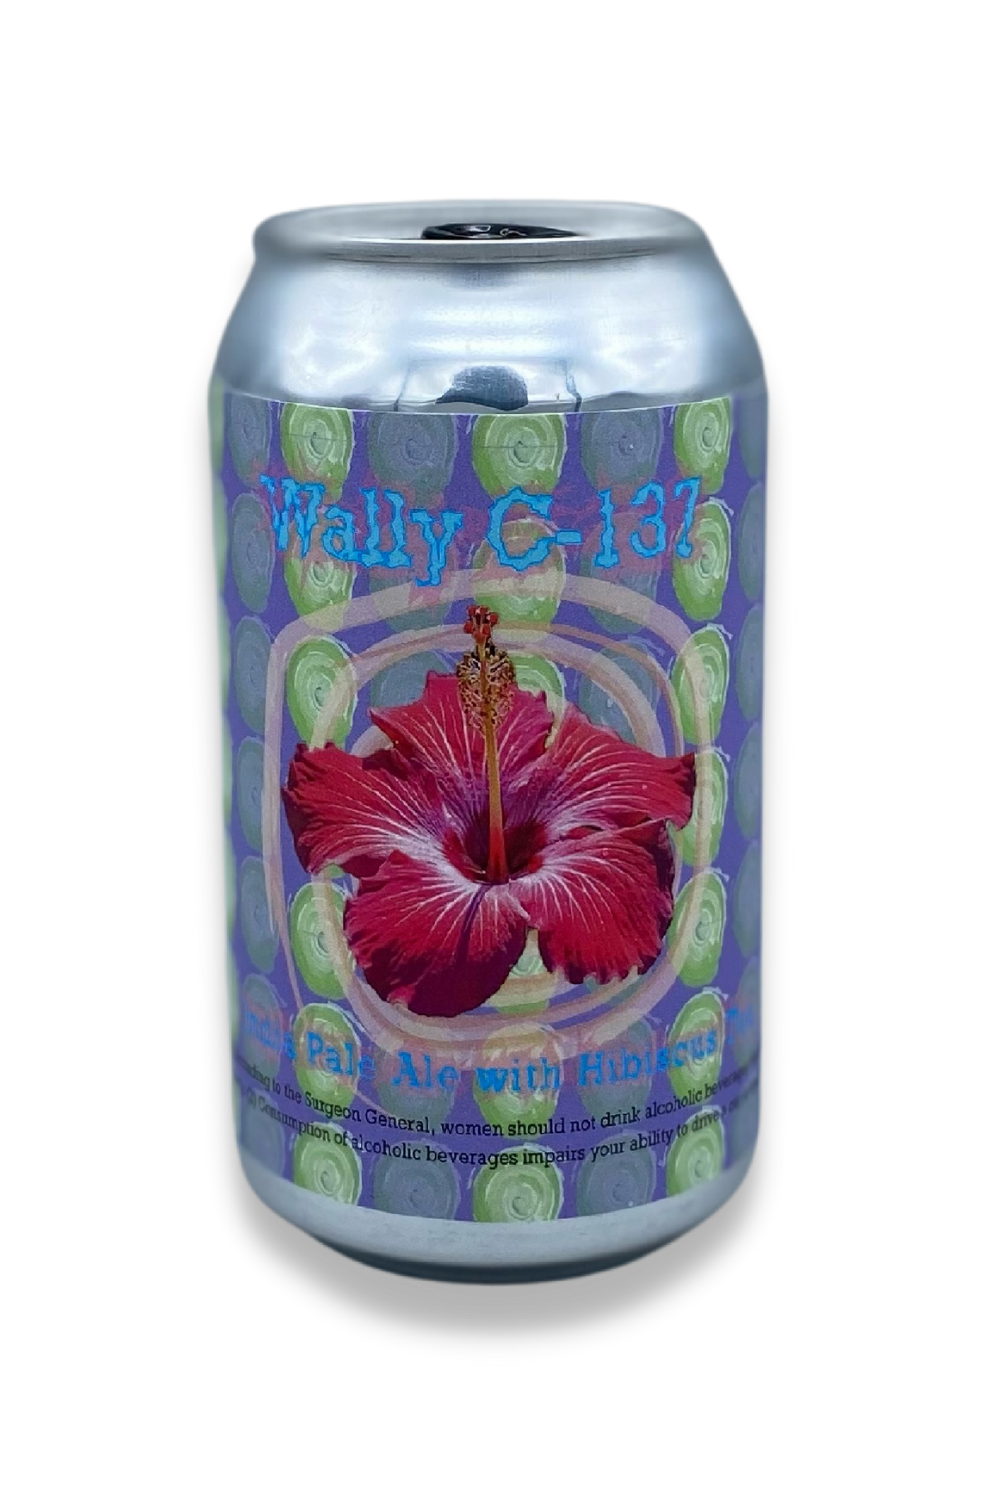 WALLY C-137 PALE ALE WITH HIBISCUS